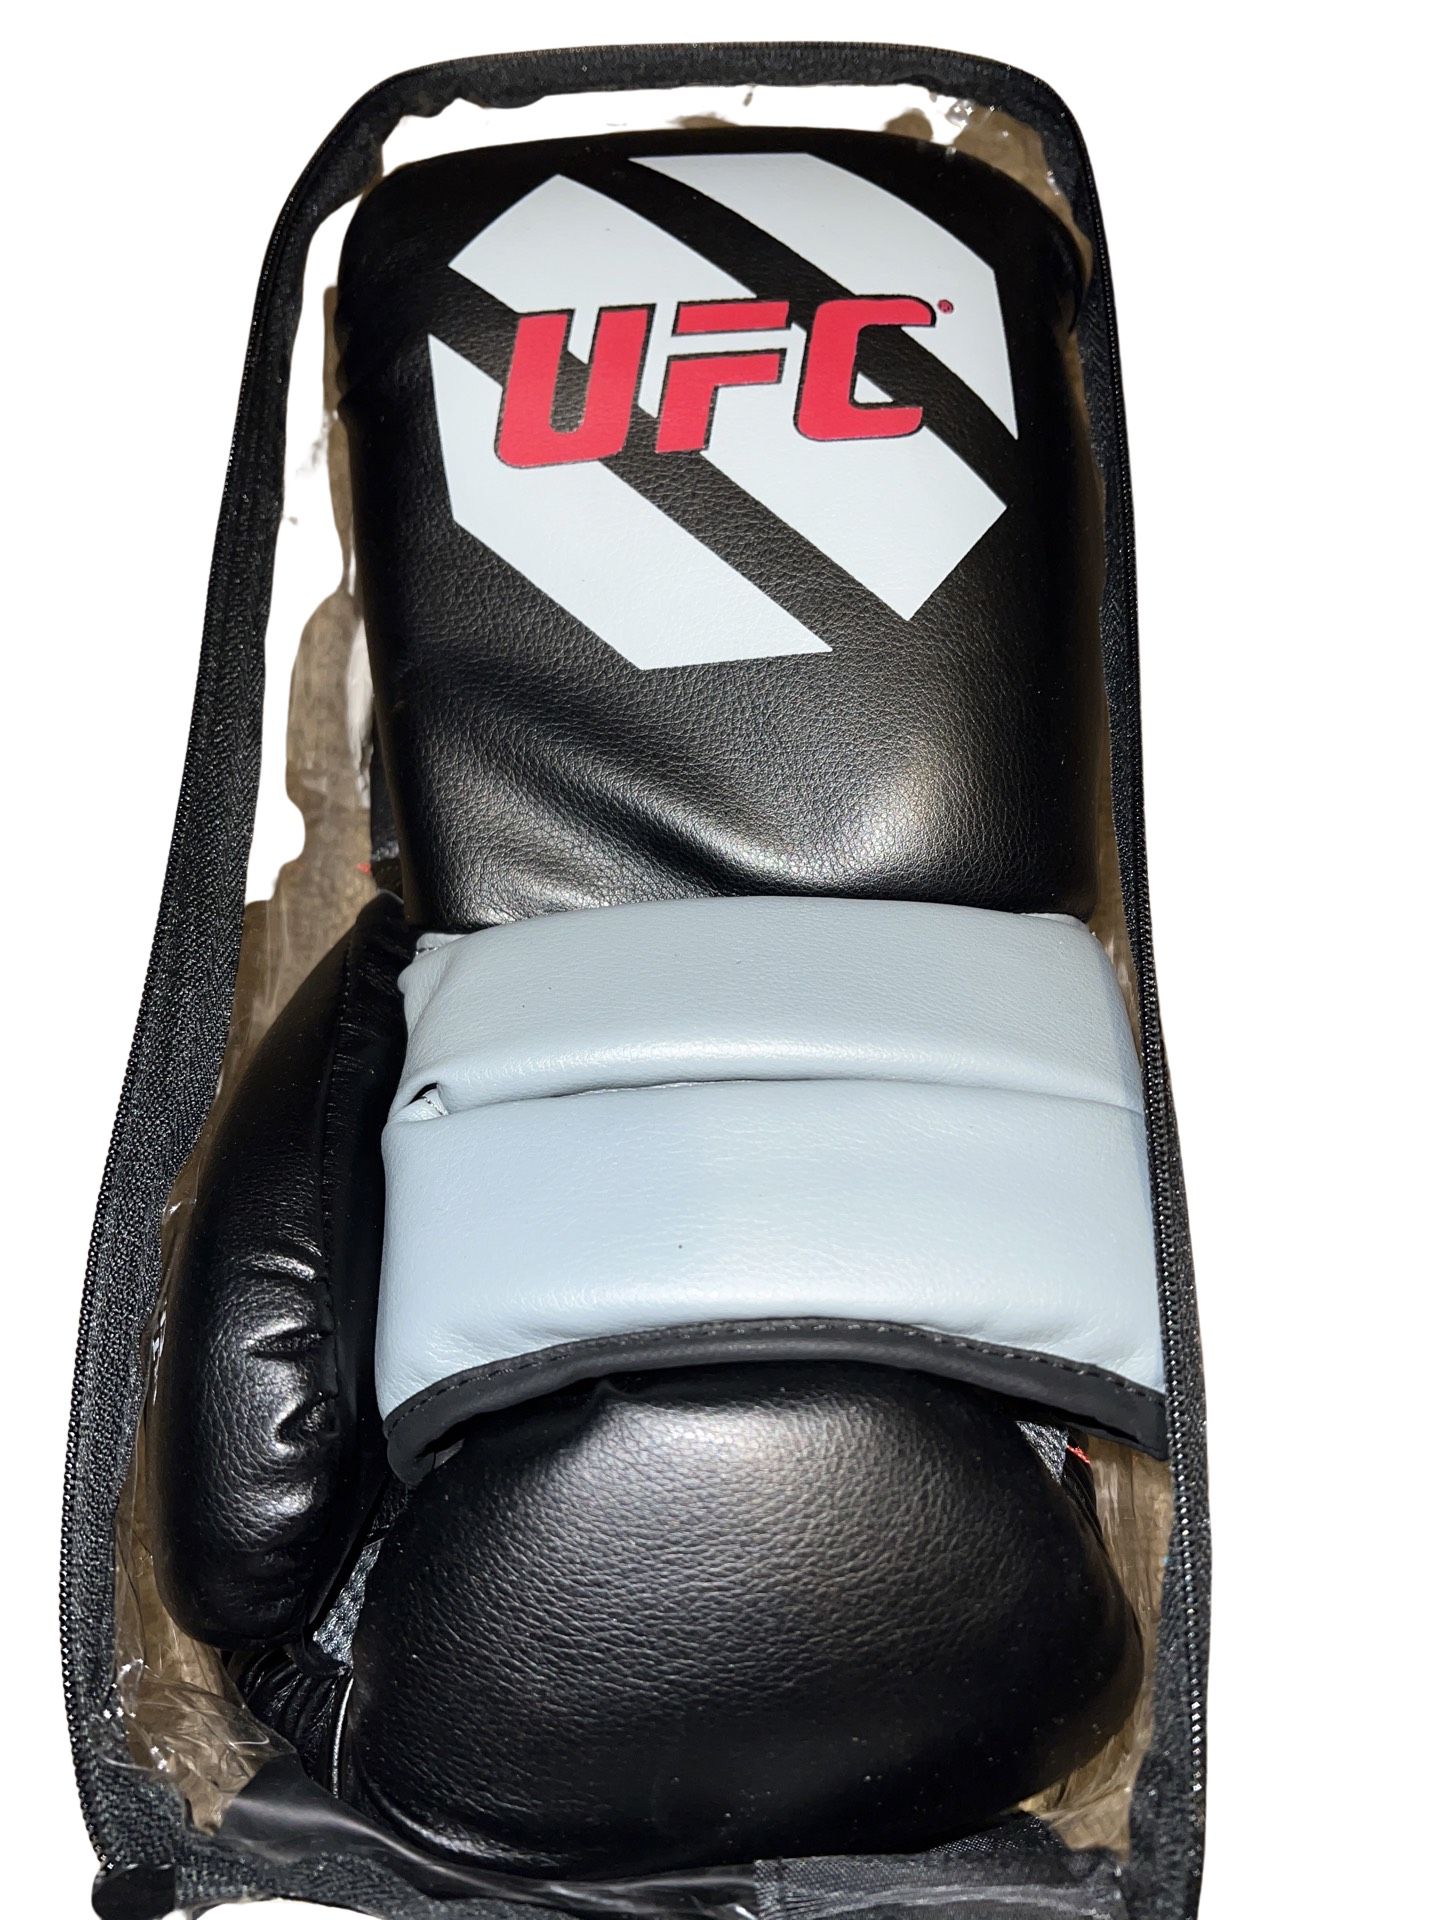 UFC MMA Boxing Gloves, Black/Gray, 14-Ounce